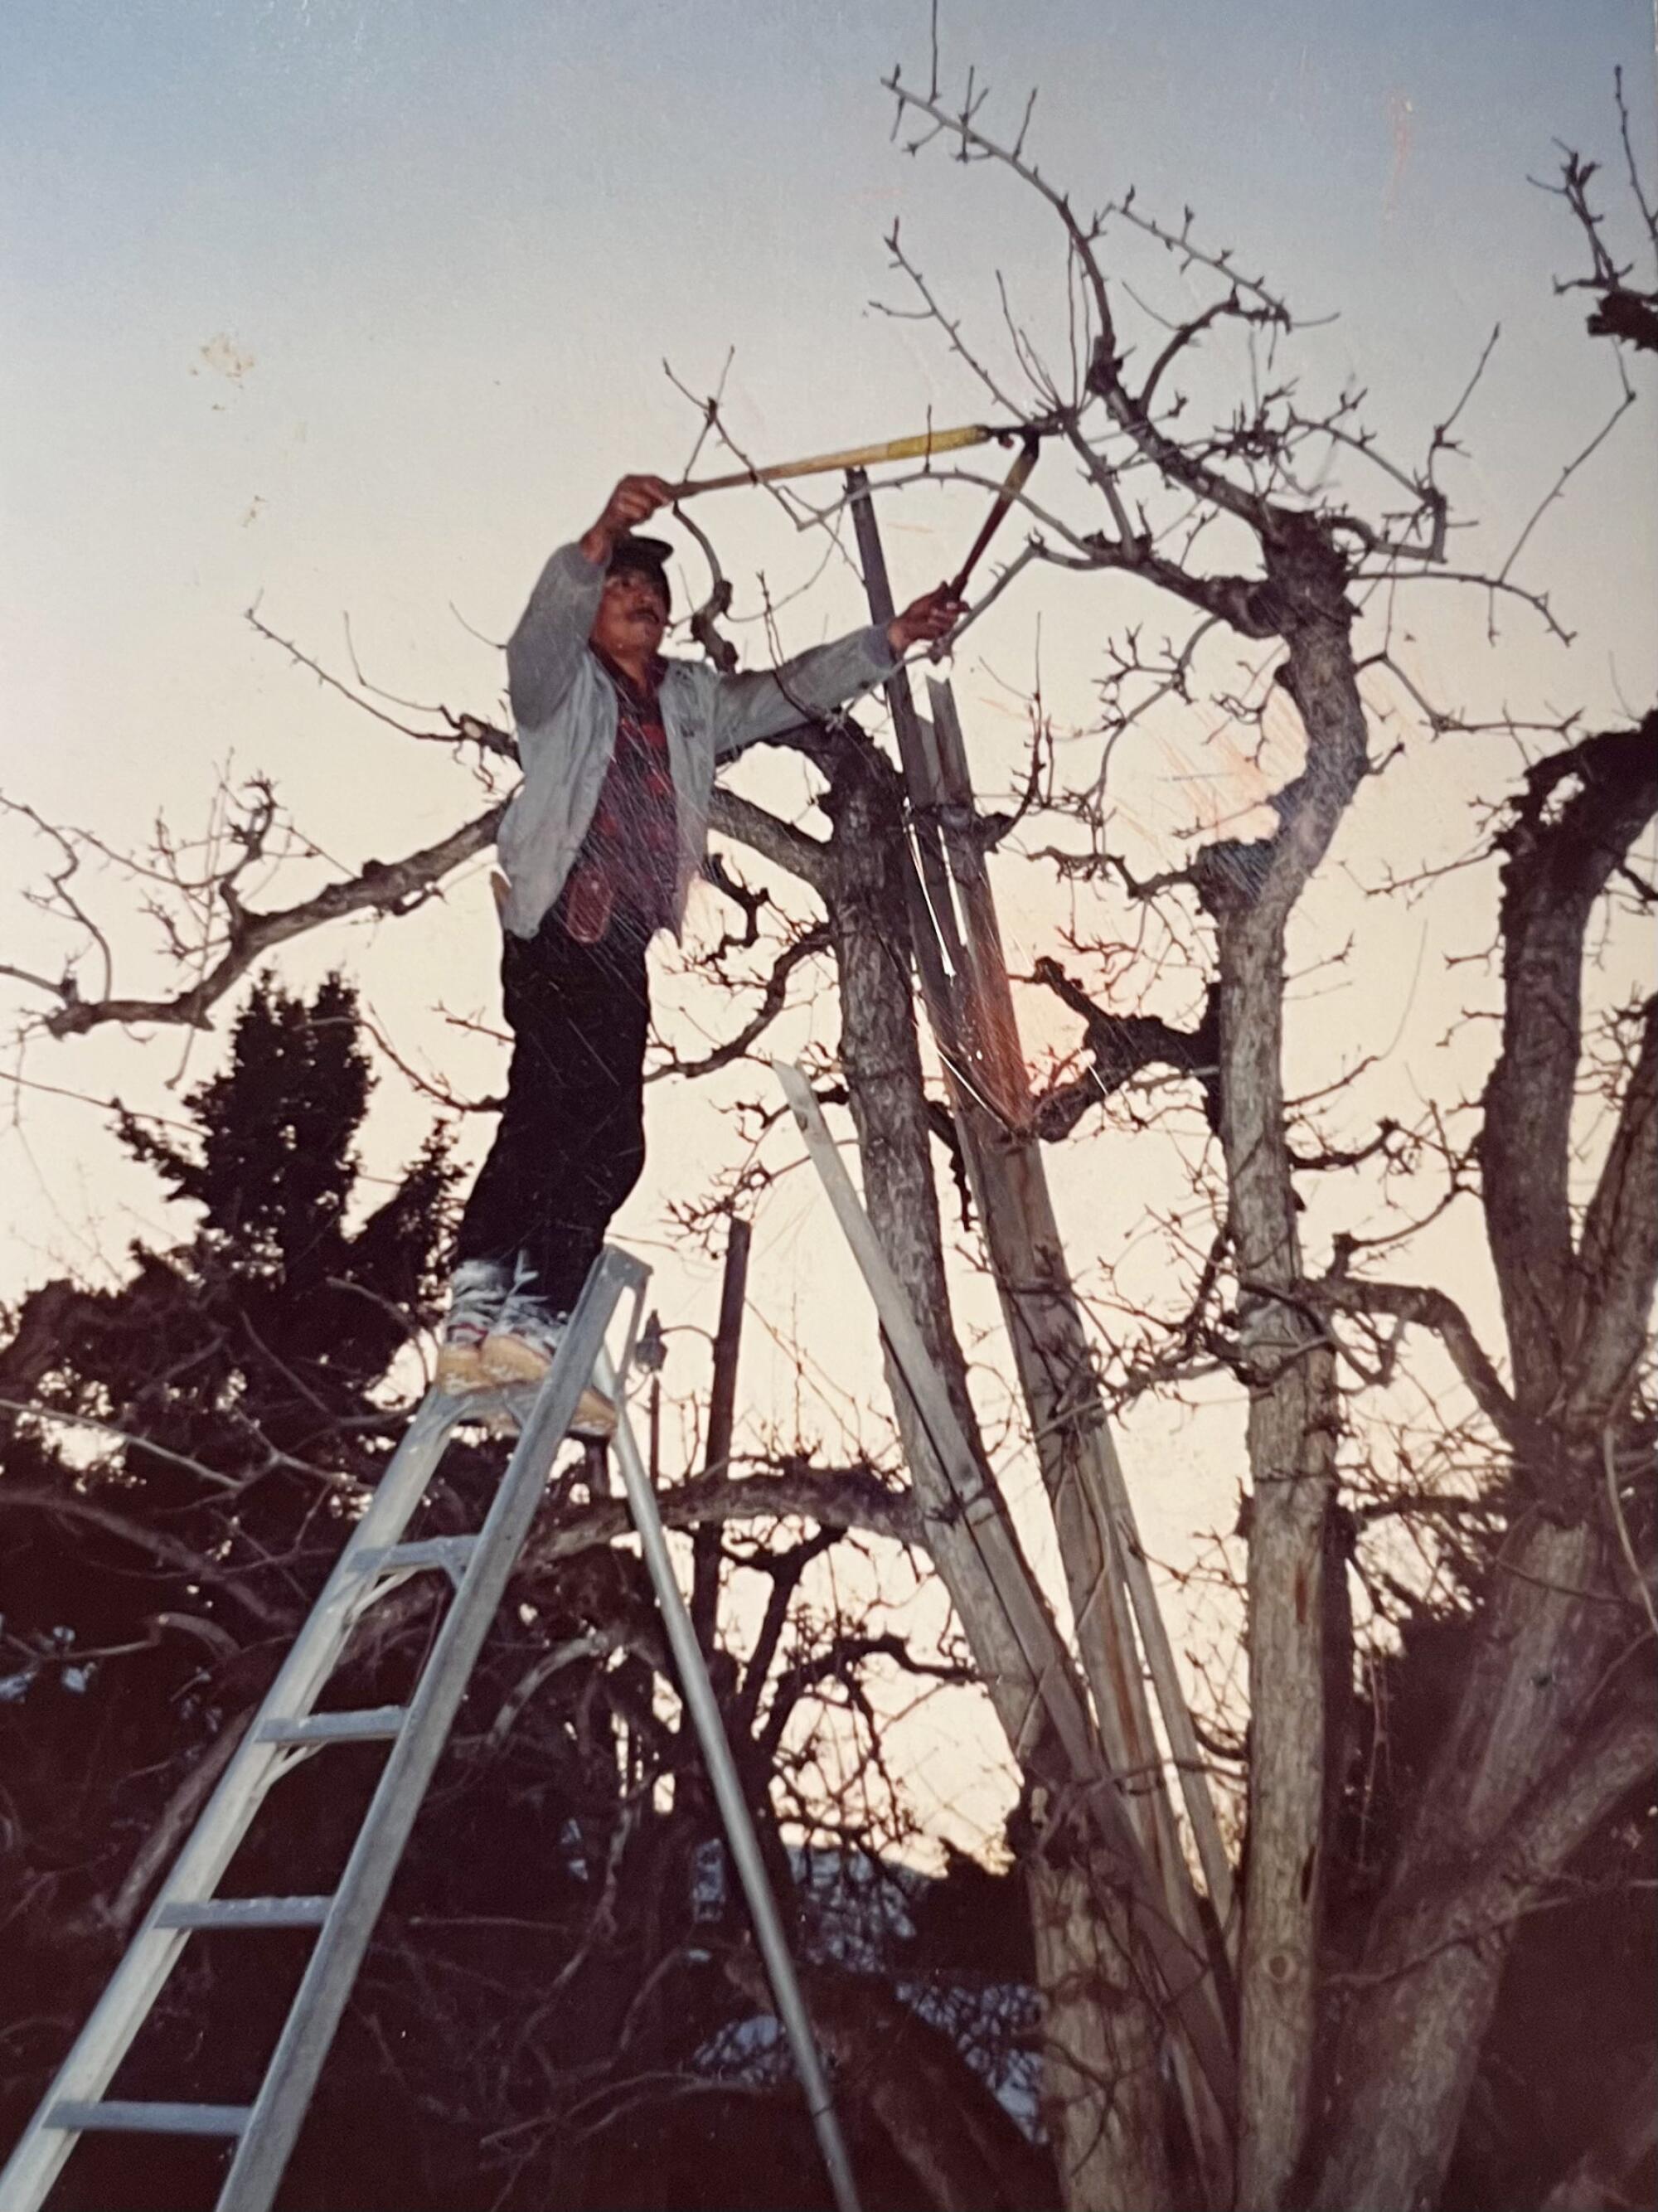 A man on a ladder, using long-handled pruners on bare tree branches